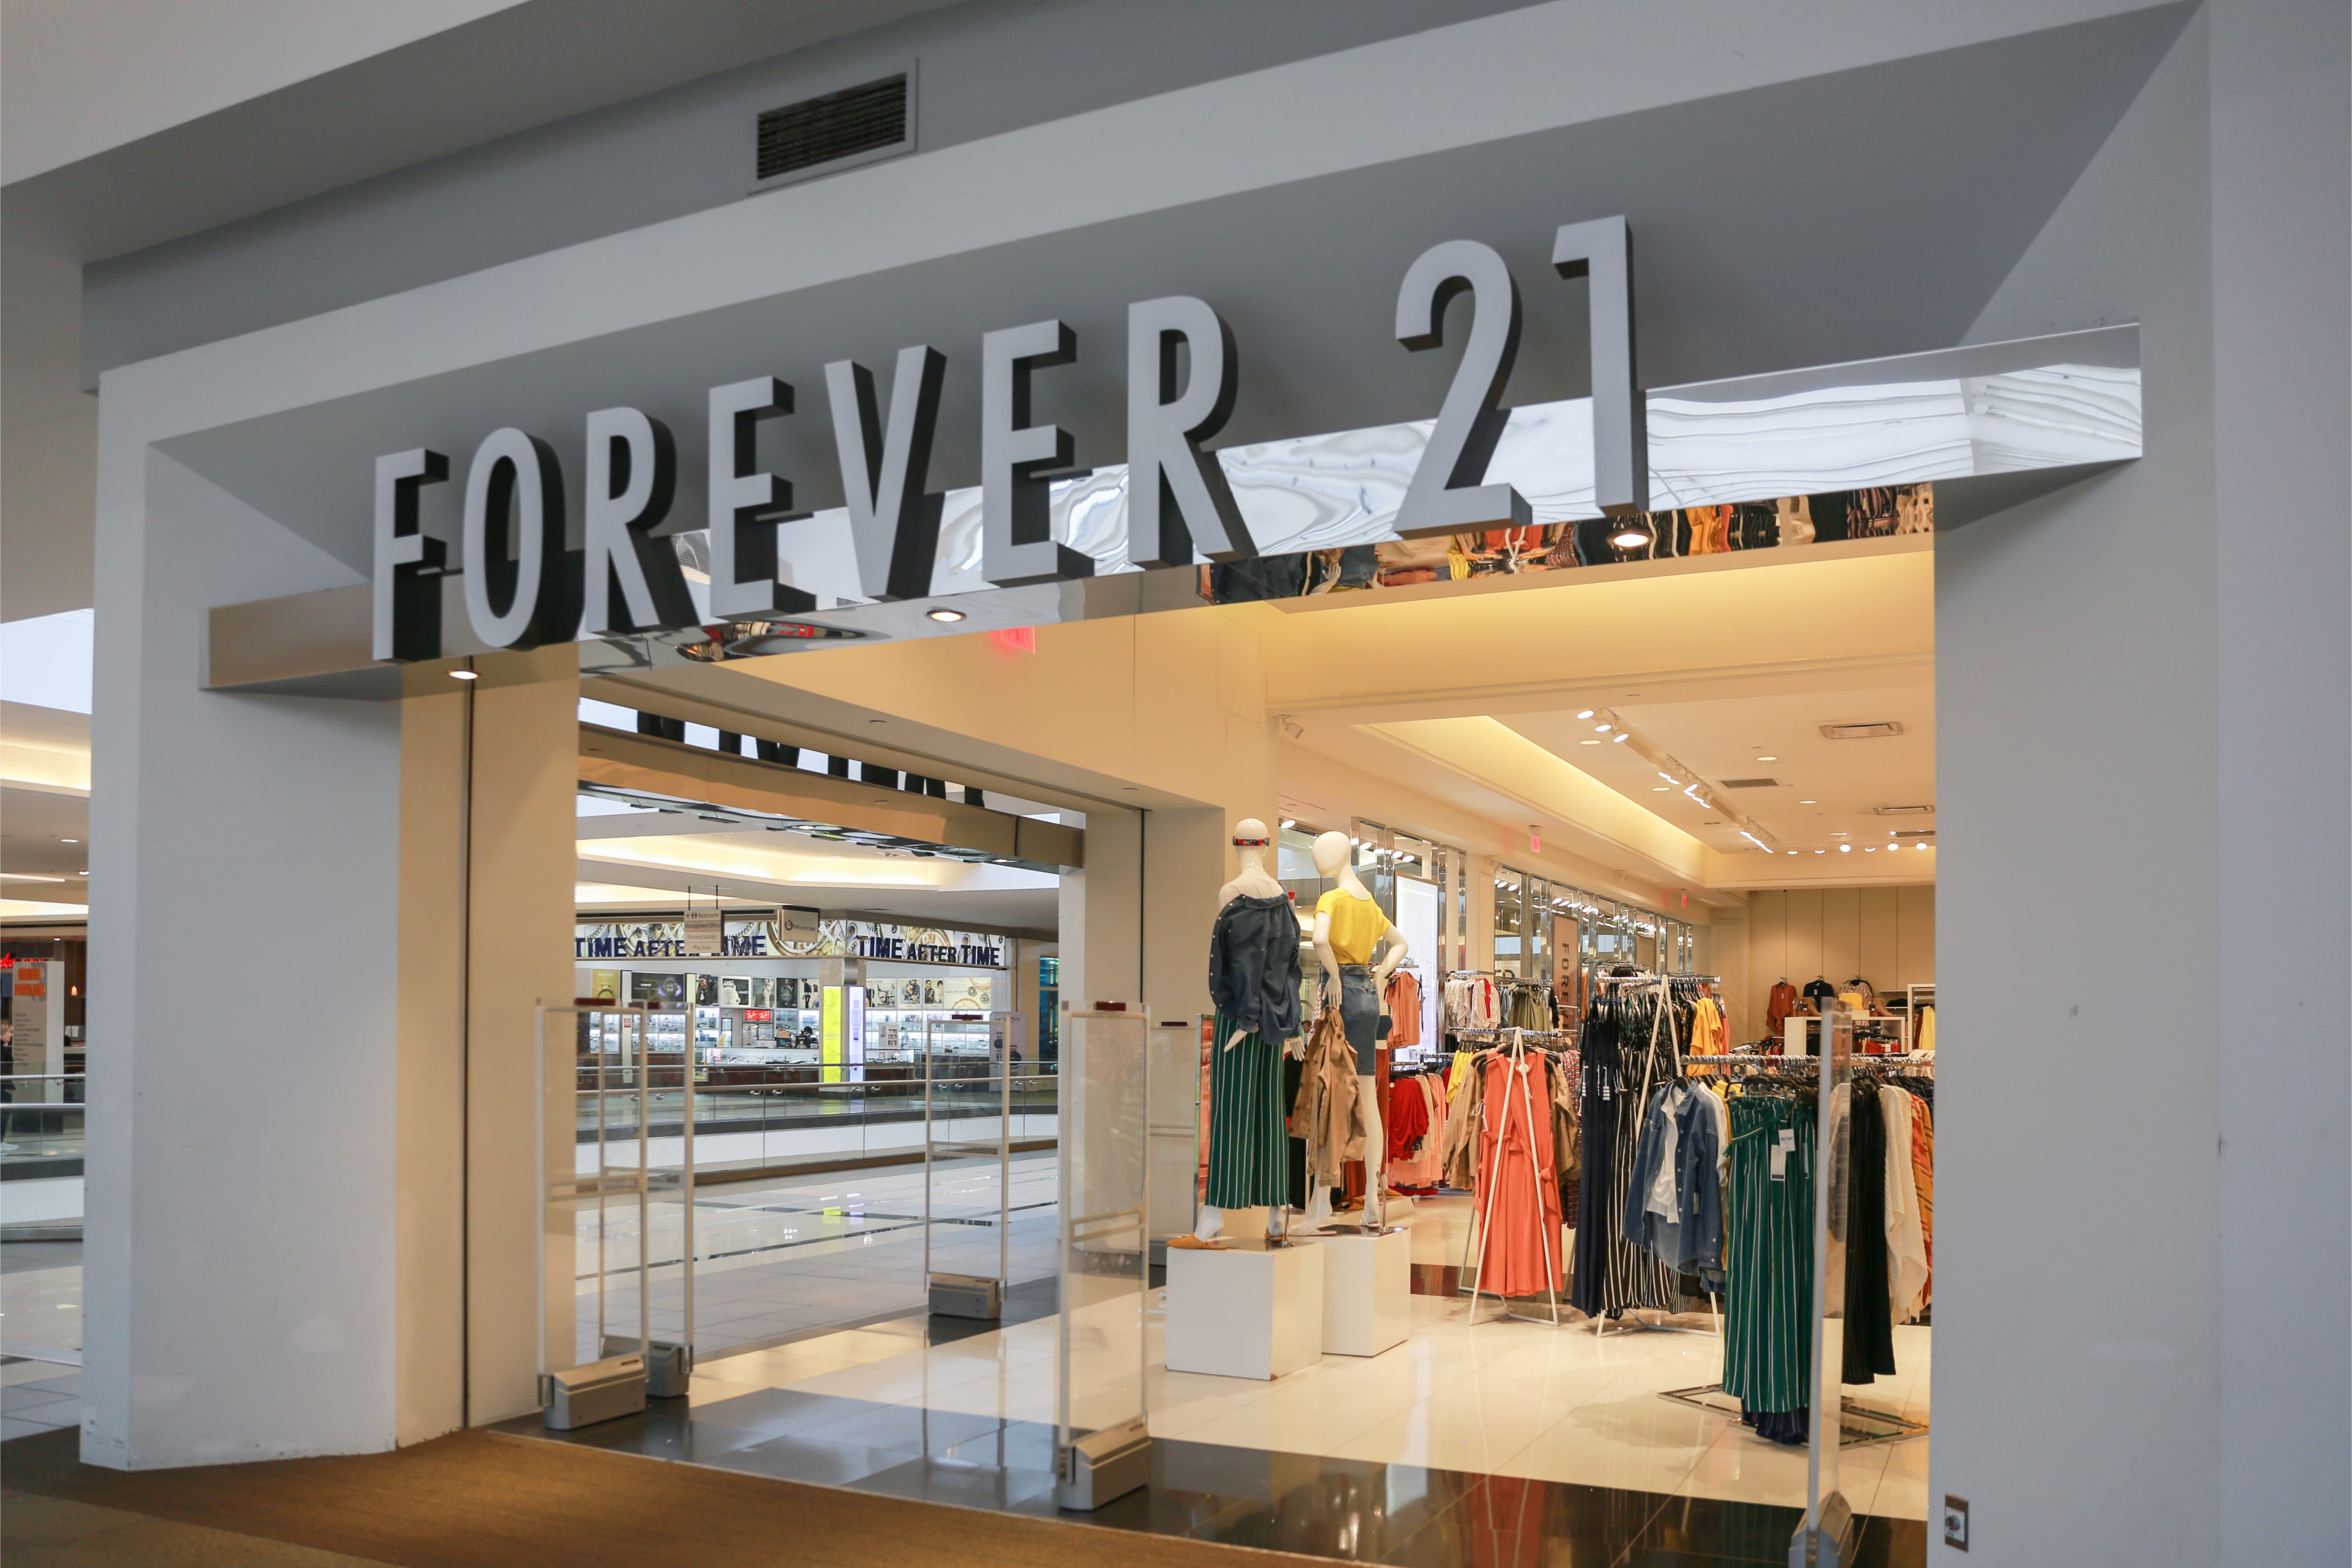 Forever 21, Losing Young Shoppers, Is Said to Be Near Bankruptcy